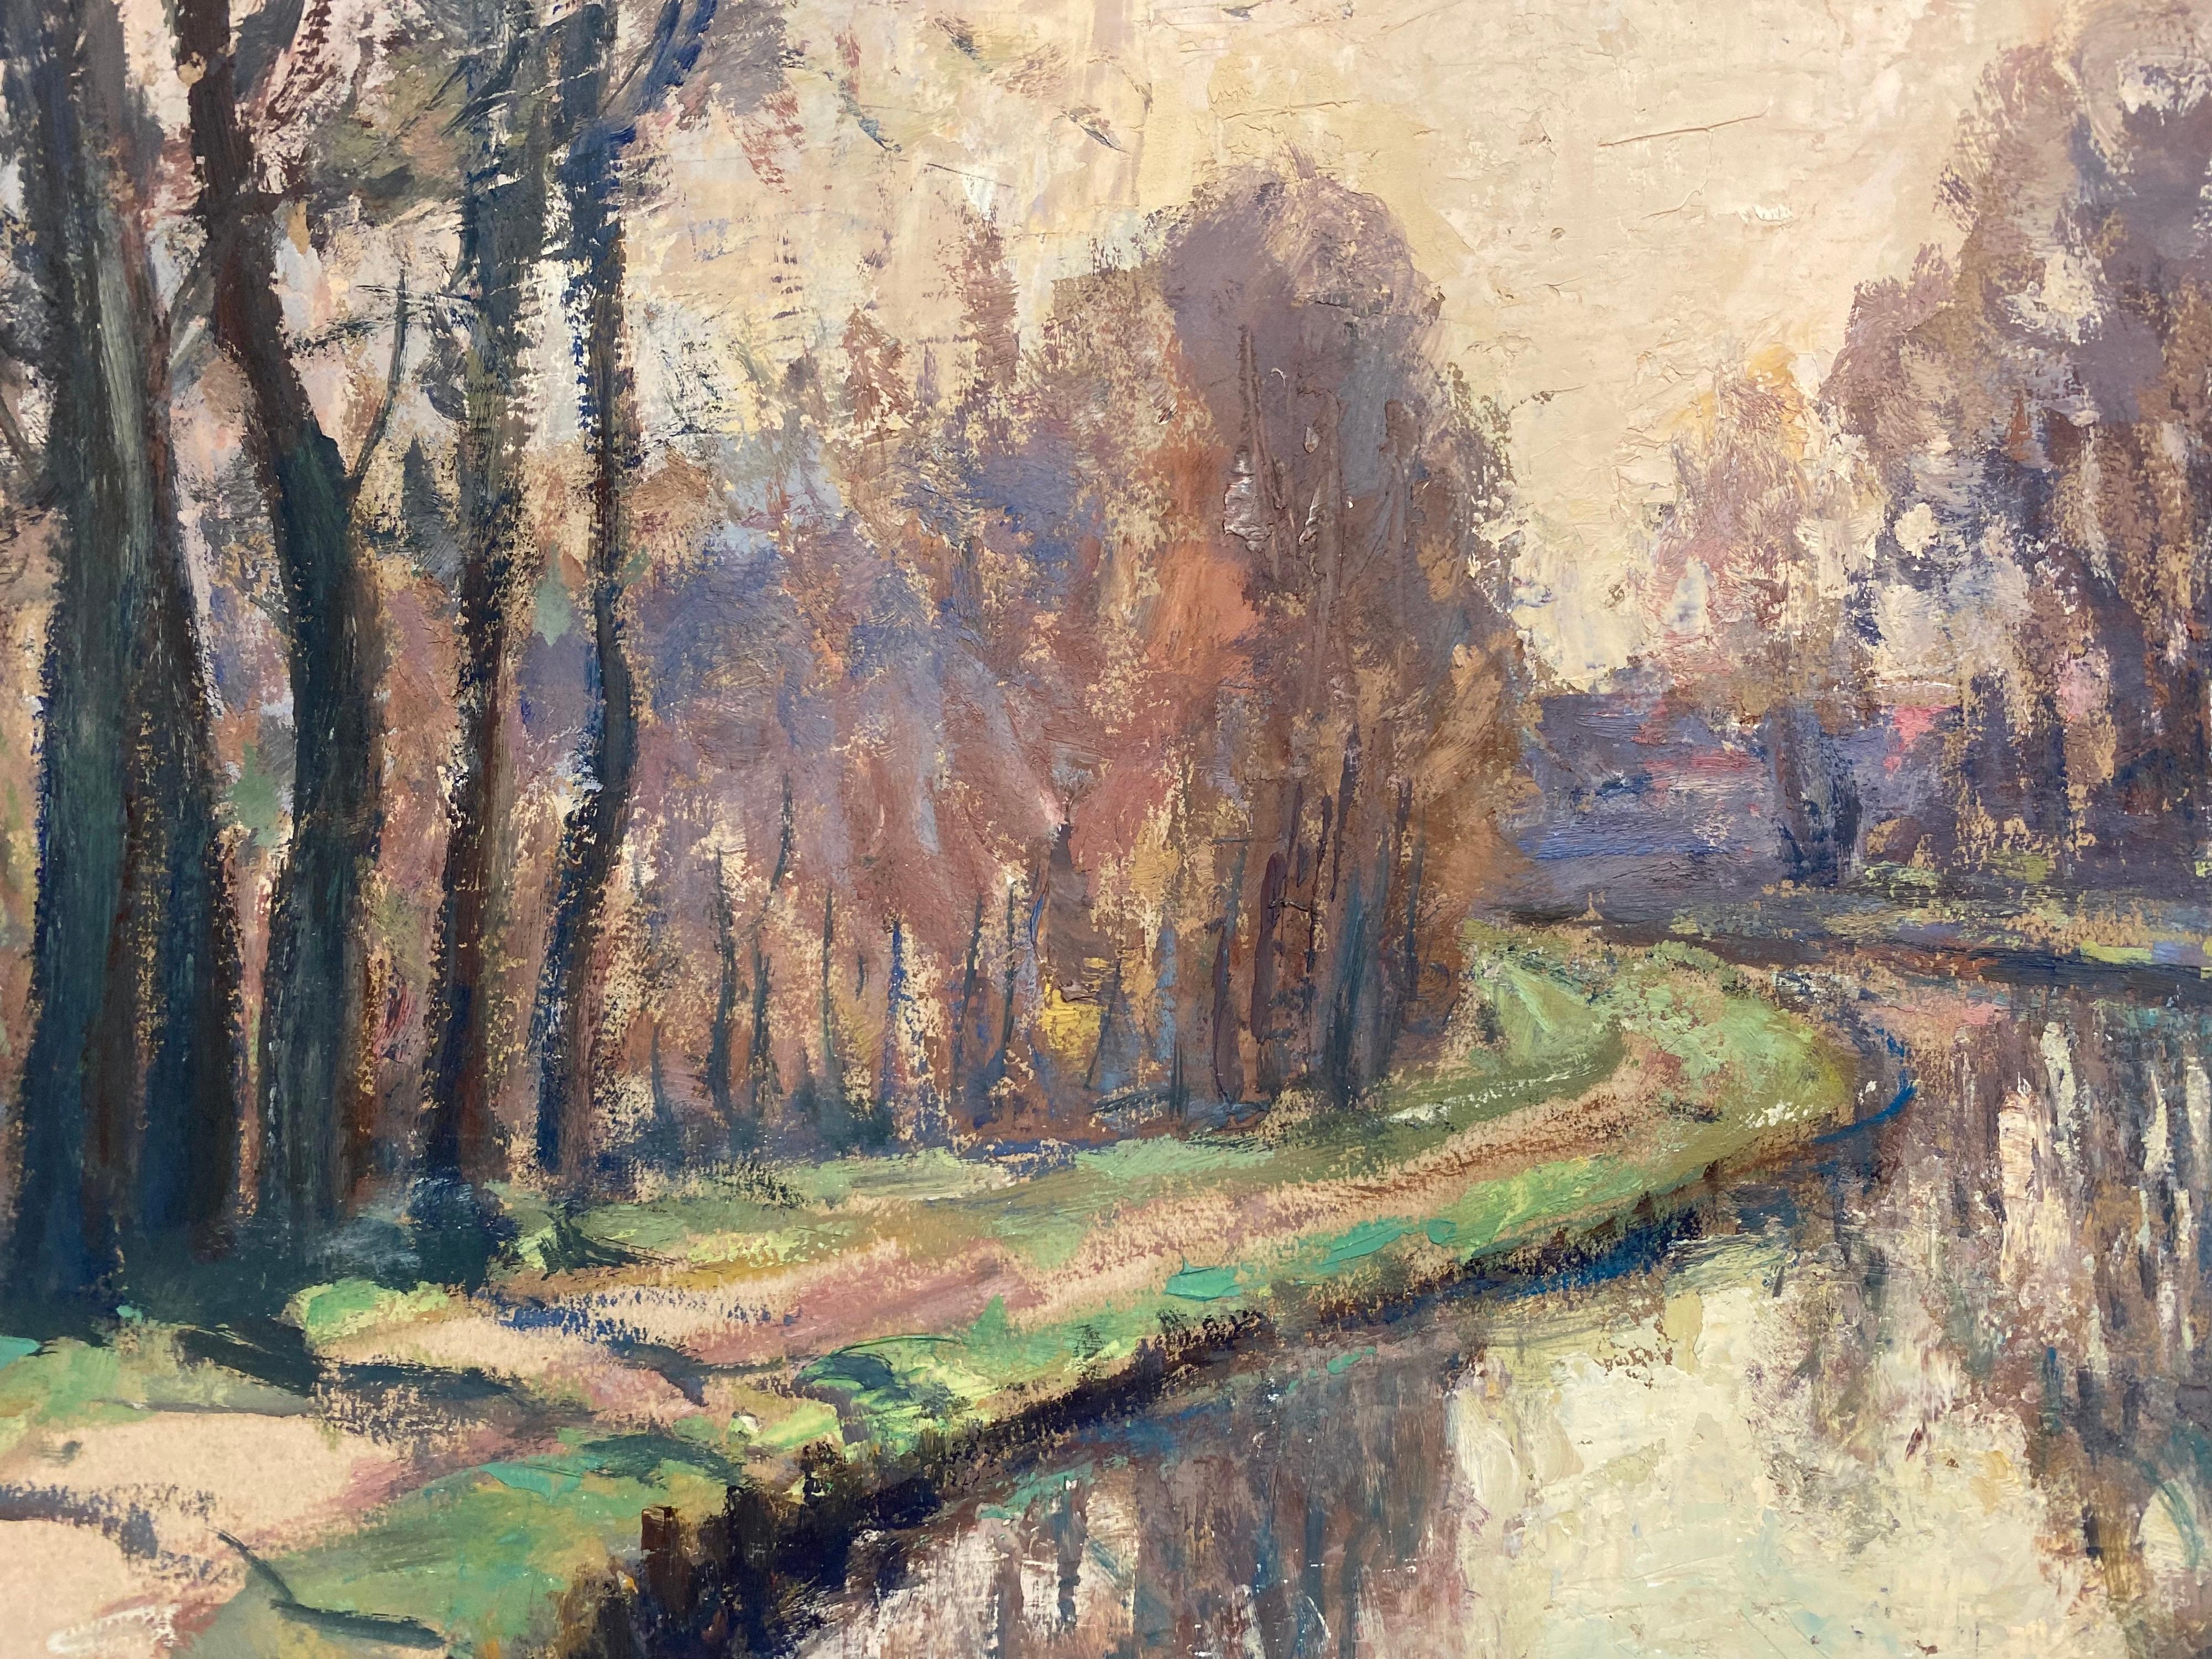 Artist/ School: Leon Hatot (French 1883-1953), signed lower corner

Title: Impressionist oil painting 

Medium: oil painting on thick paper, unframed.

Size:  painting: 13 x 19.75 inches.

Provenance: all the paintings we have for sale by this